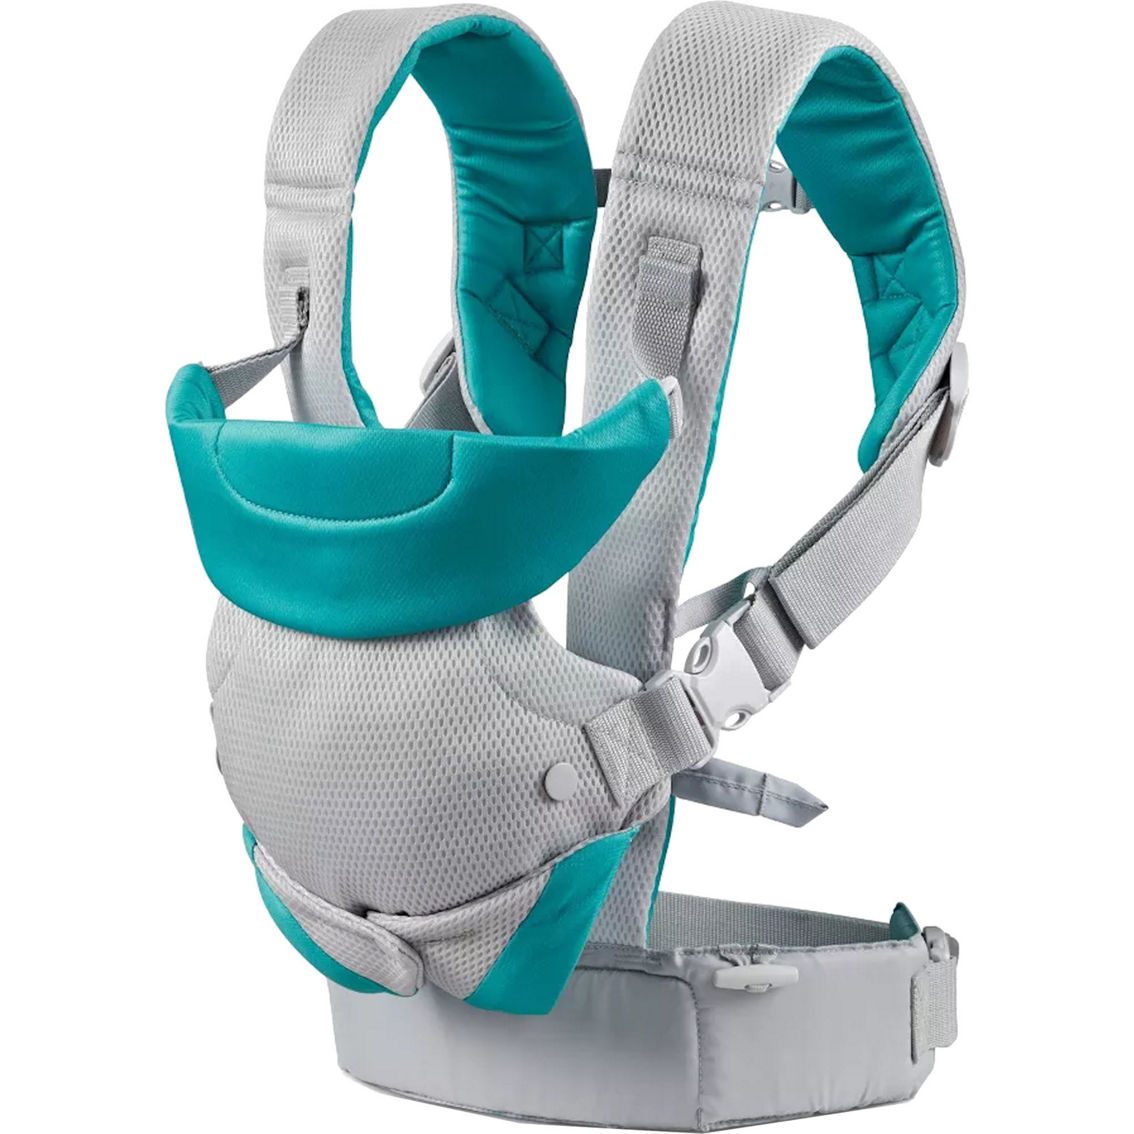 Infantino Flip 4 in 1 Light and Airy Convertible Carrier - Image 2 of 5